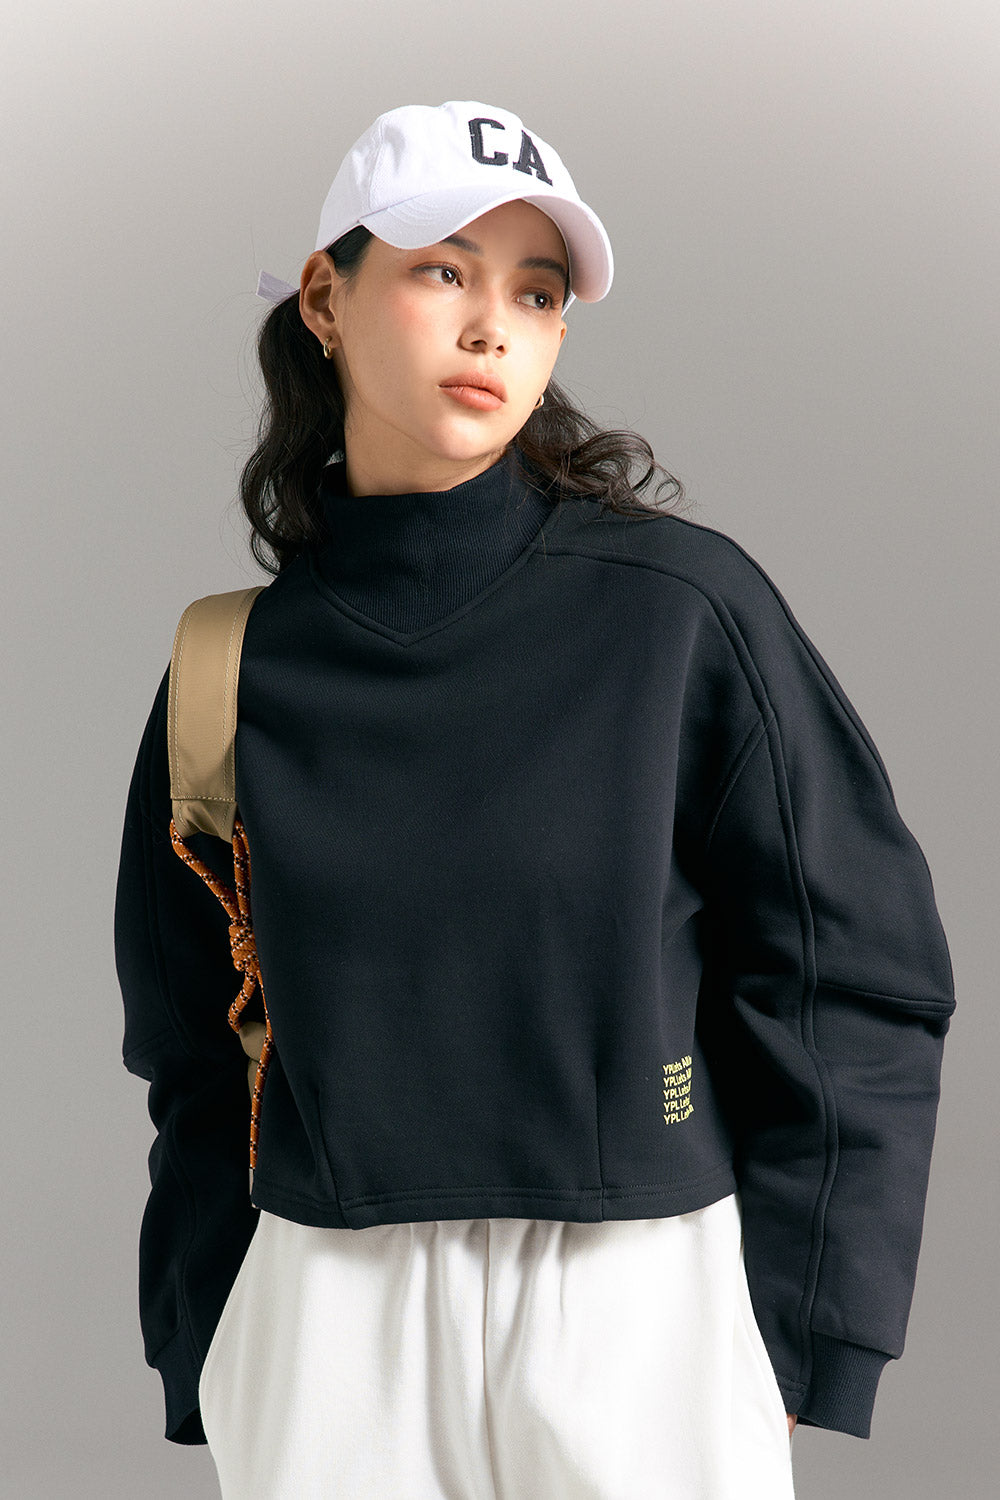 YPL High Neck Pullover